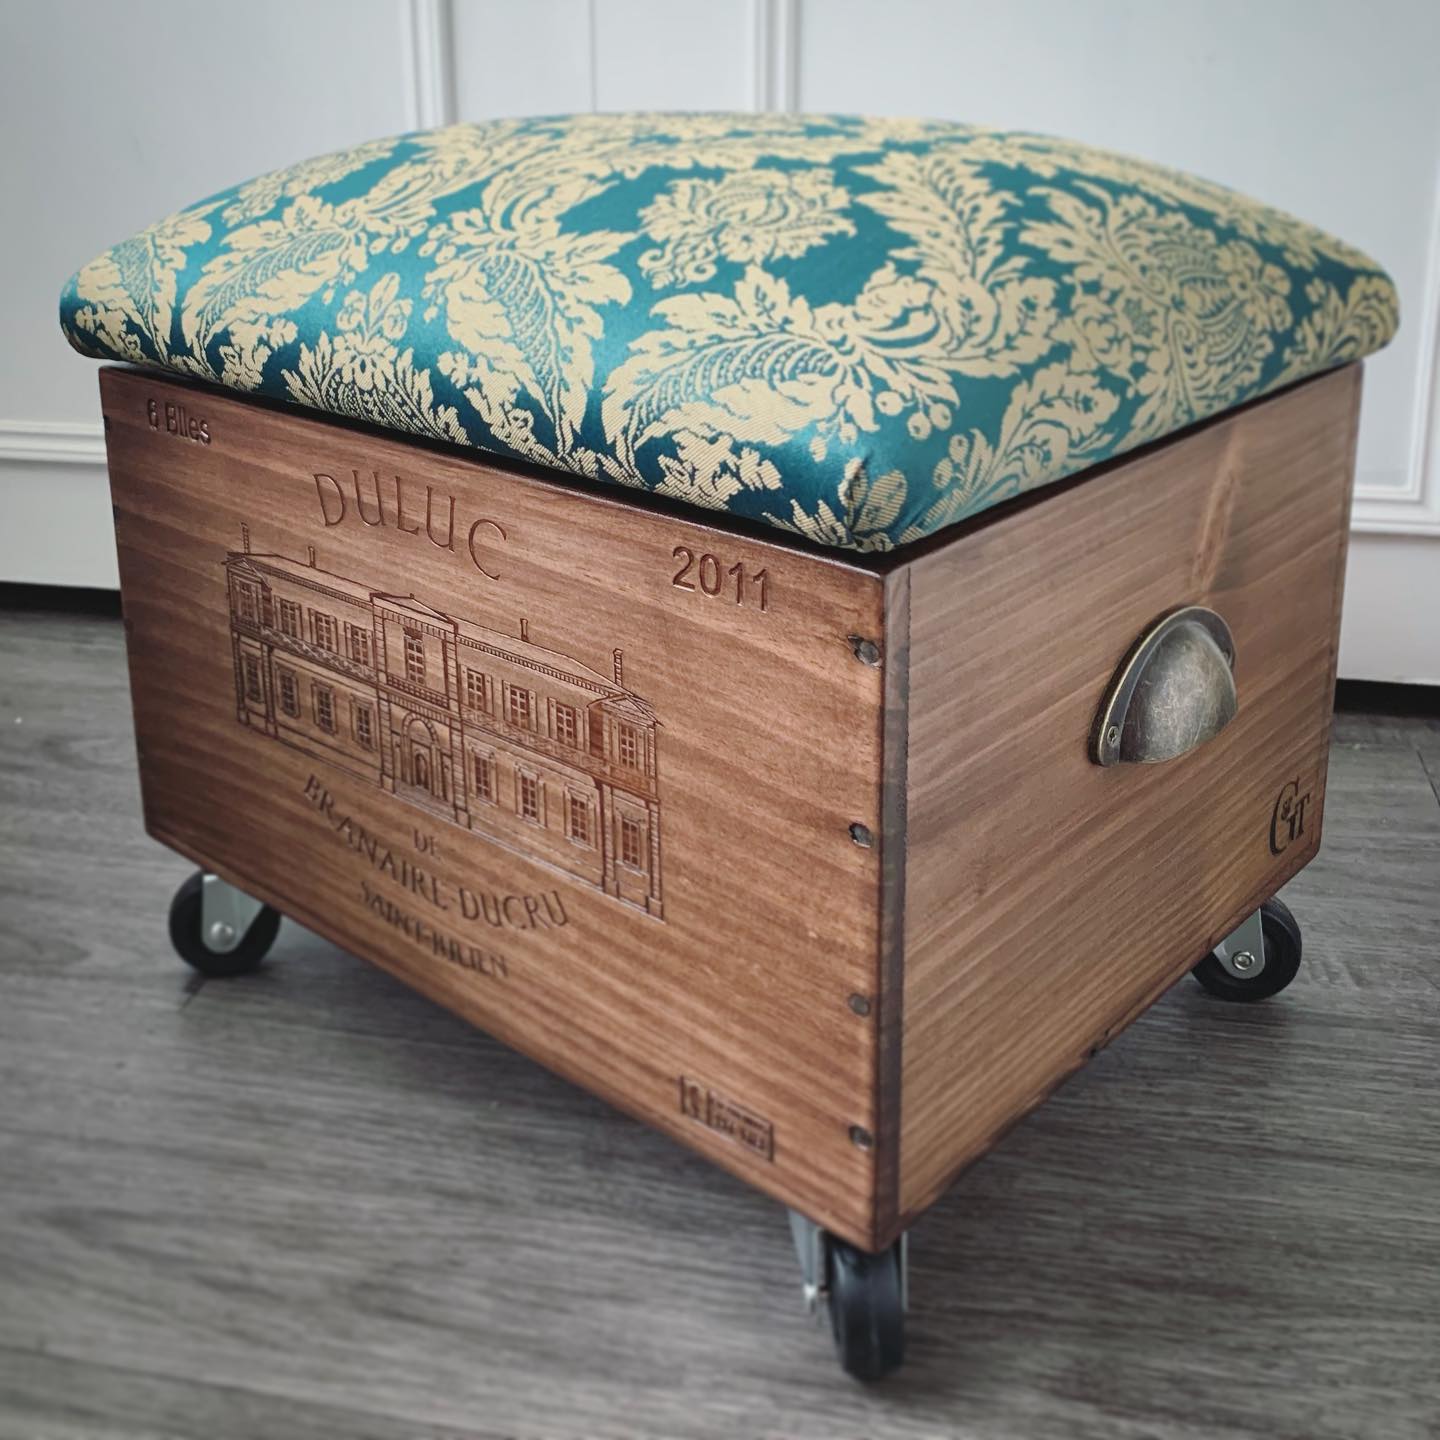 This little cutie is all ready to go to it’s new home!So glad we managed to get more of this gorgeous Damask fabric ?* also available in a navy#customised #ottoman #handcrafted #homedecor #unique #storagesolutions #gingerandtweed #beautifulfabric